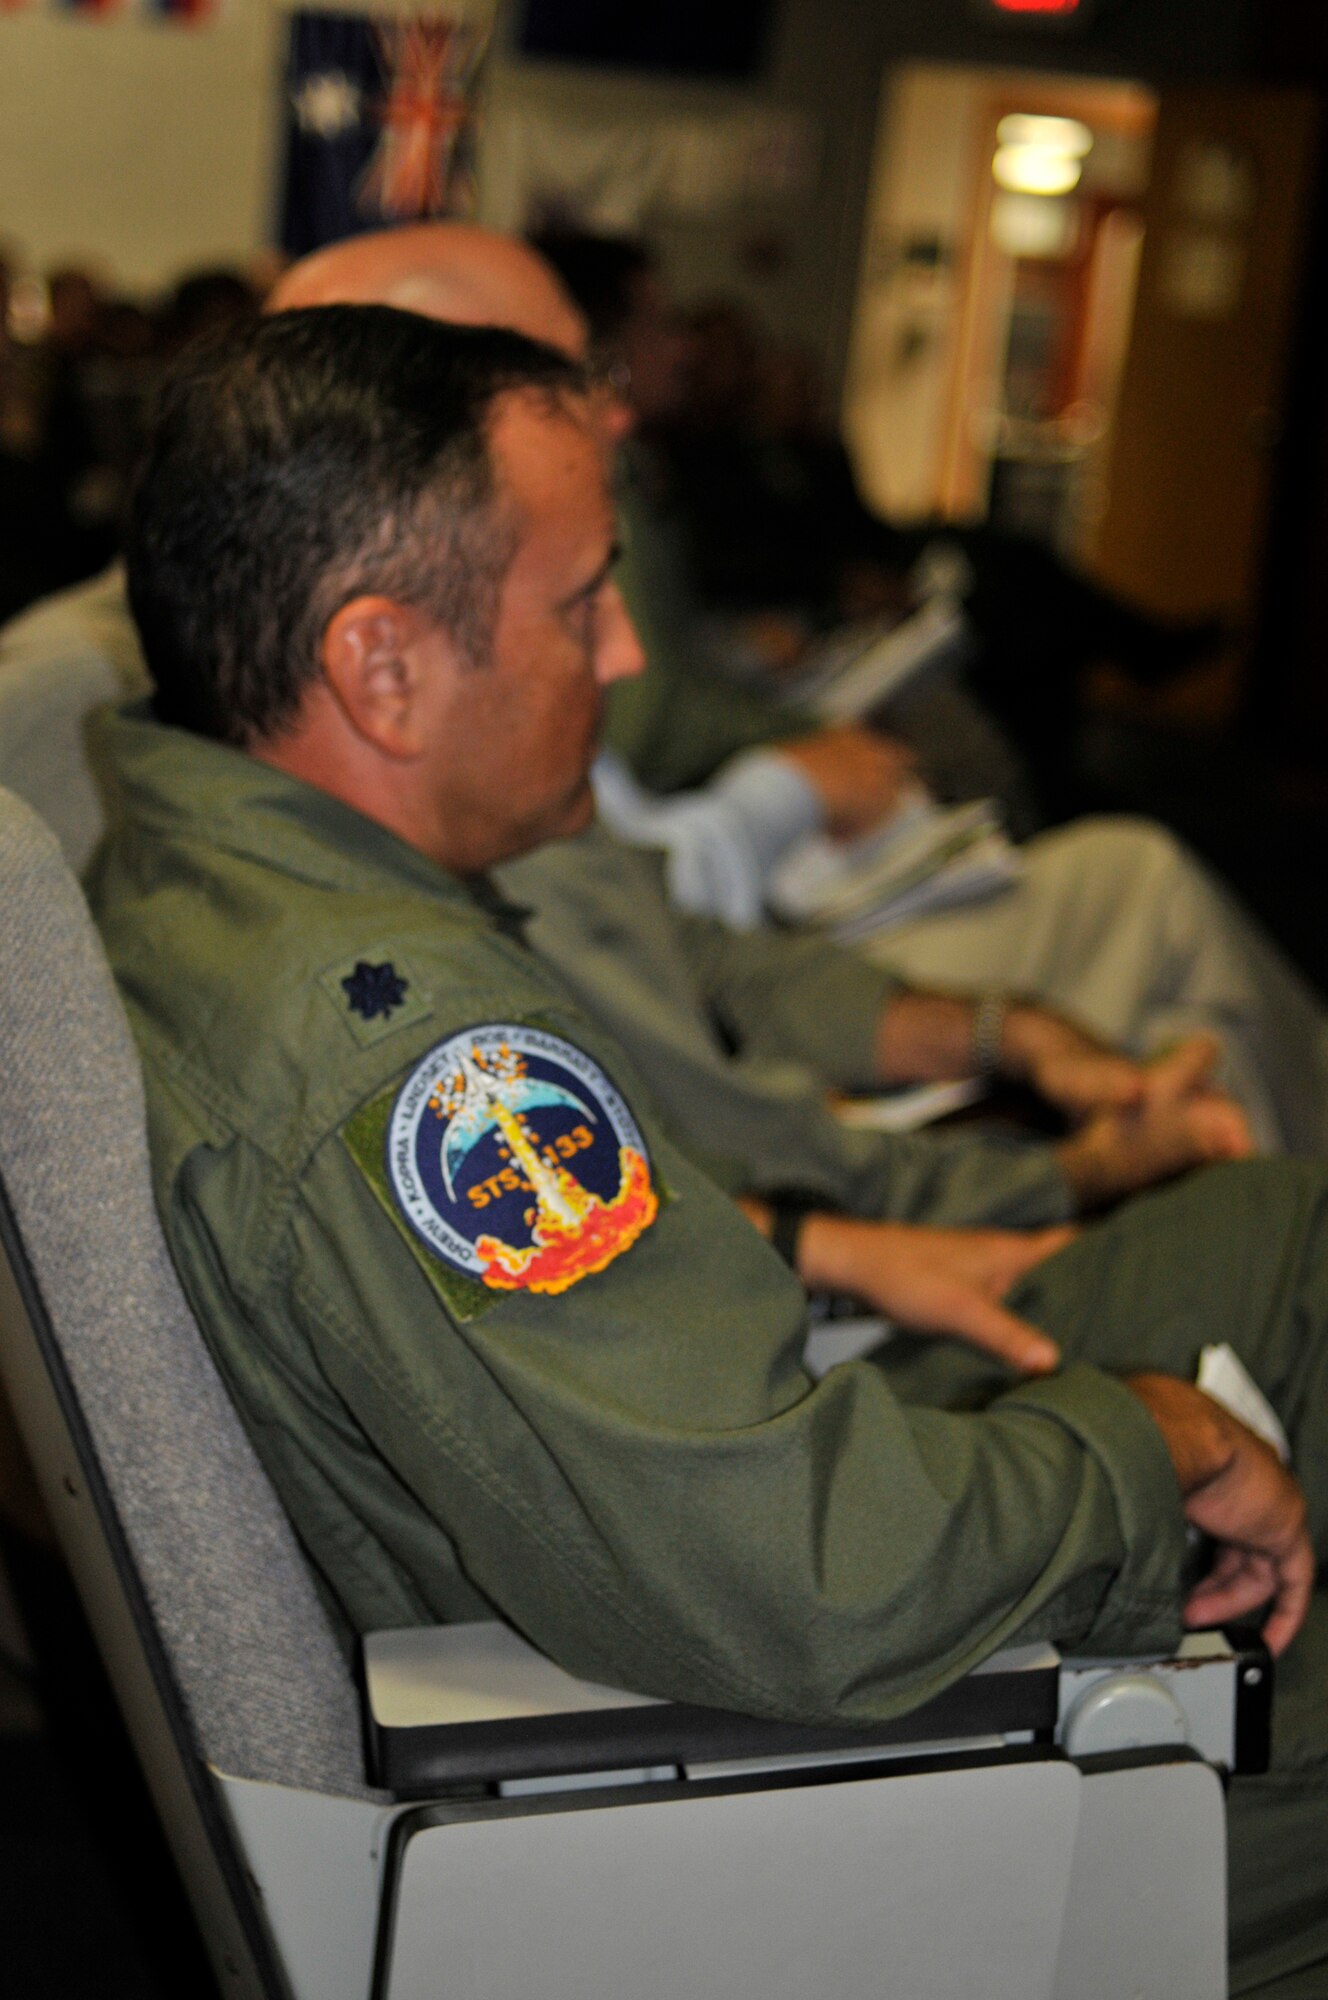 PATRICK AIR FORCE BASE, Fla. - Lt. Col. Lars Ulissey, 45th Space Wing Chief of Bioastronautics, Det. 3, Medical Division, along with nearly 100 servicemembers from all five branches, listens during the Shuttle Joint Task Force in briefing, at the 301st Rescue Squadron here Nov. 2 to prepare those who are here supporting the emergency portion of the space shuttle Discovery launch Nov. 5. It's the last launch of Discover and the third to the last space shuttle launch.  Shown on Lt. Colonel Ulissey's shoulder is the NASA patch made especially for this launch. (U.S. Air Force photo/Capt. Cathleen Snow)